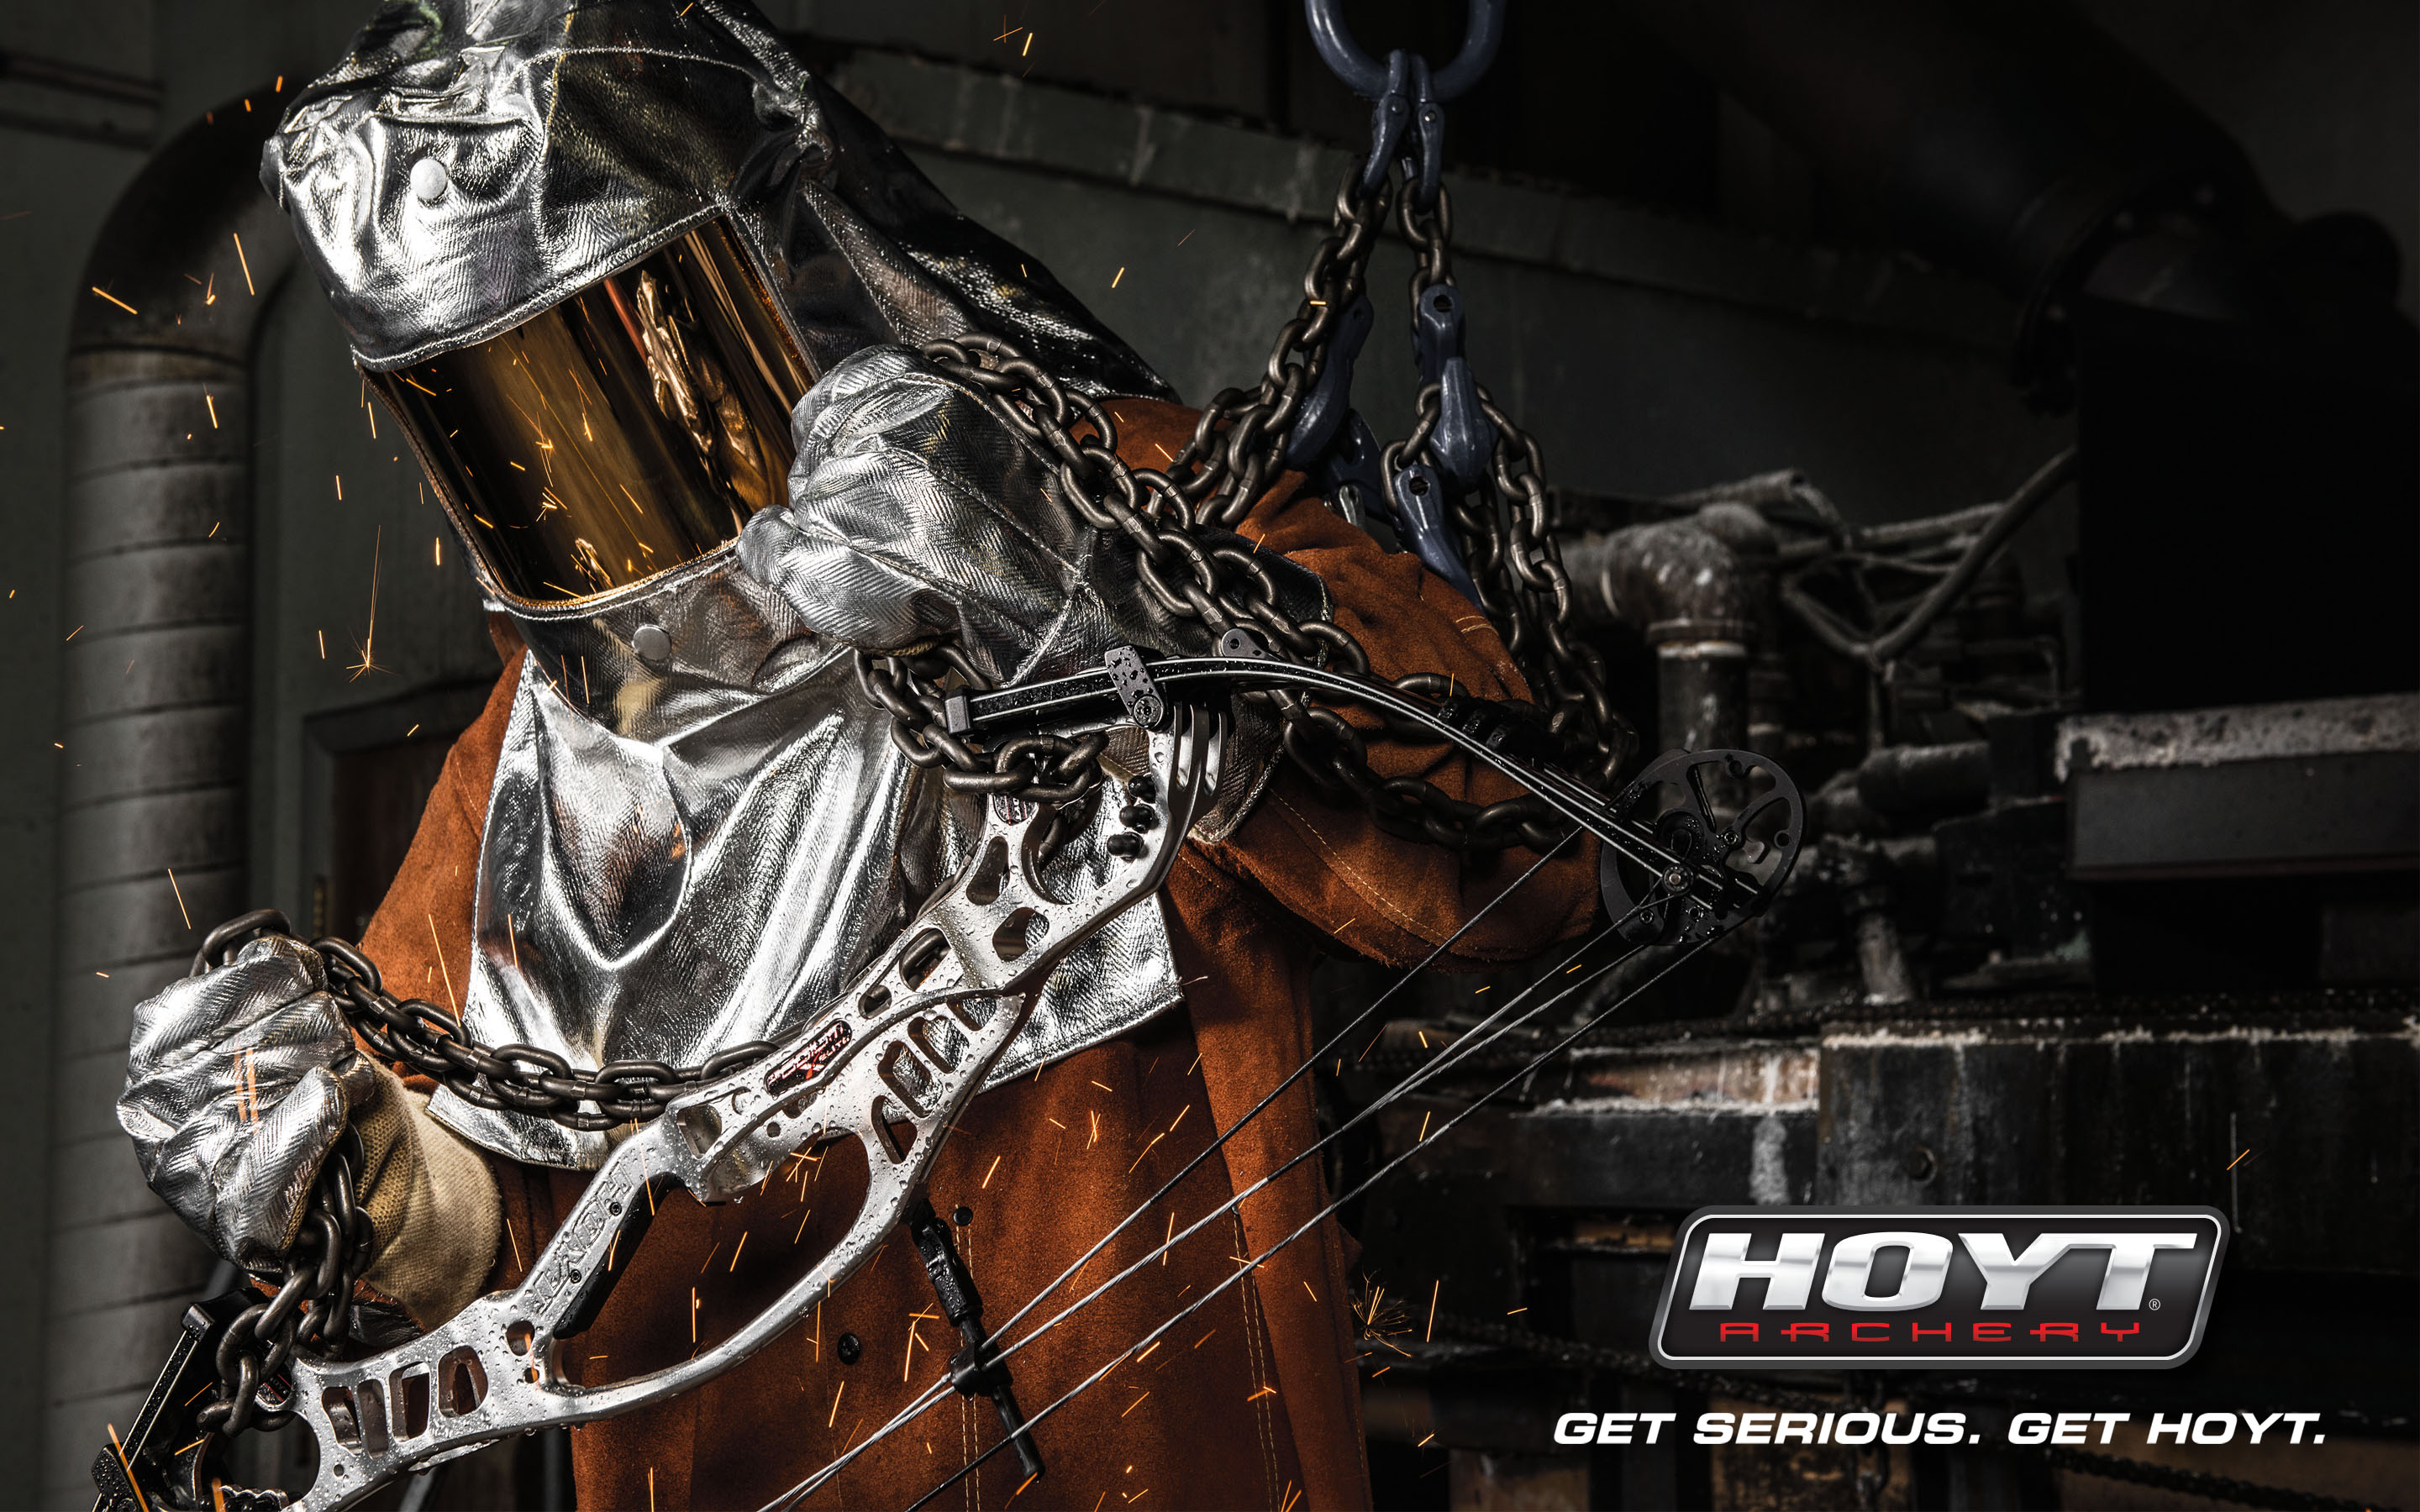 hoyt archery wallpapers